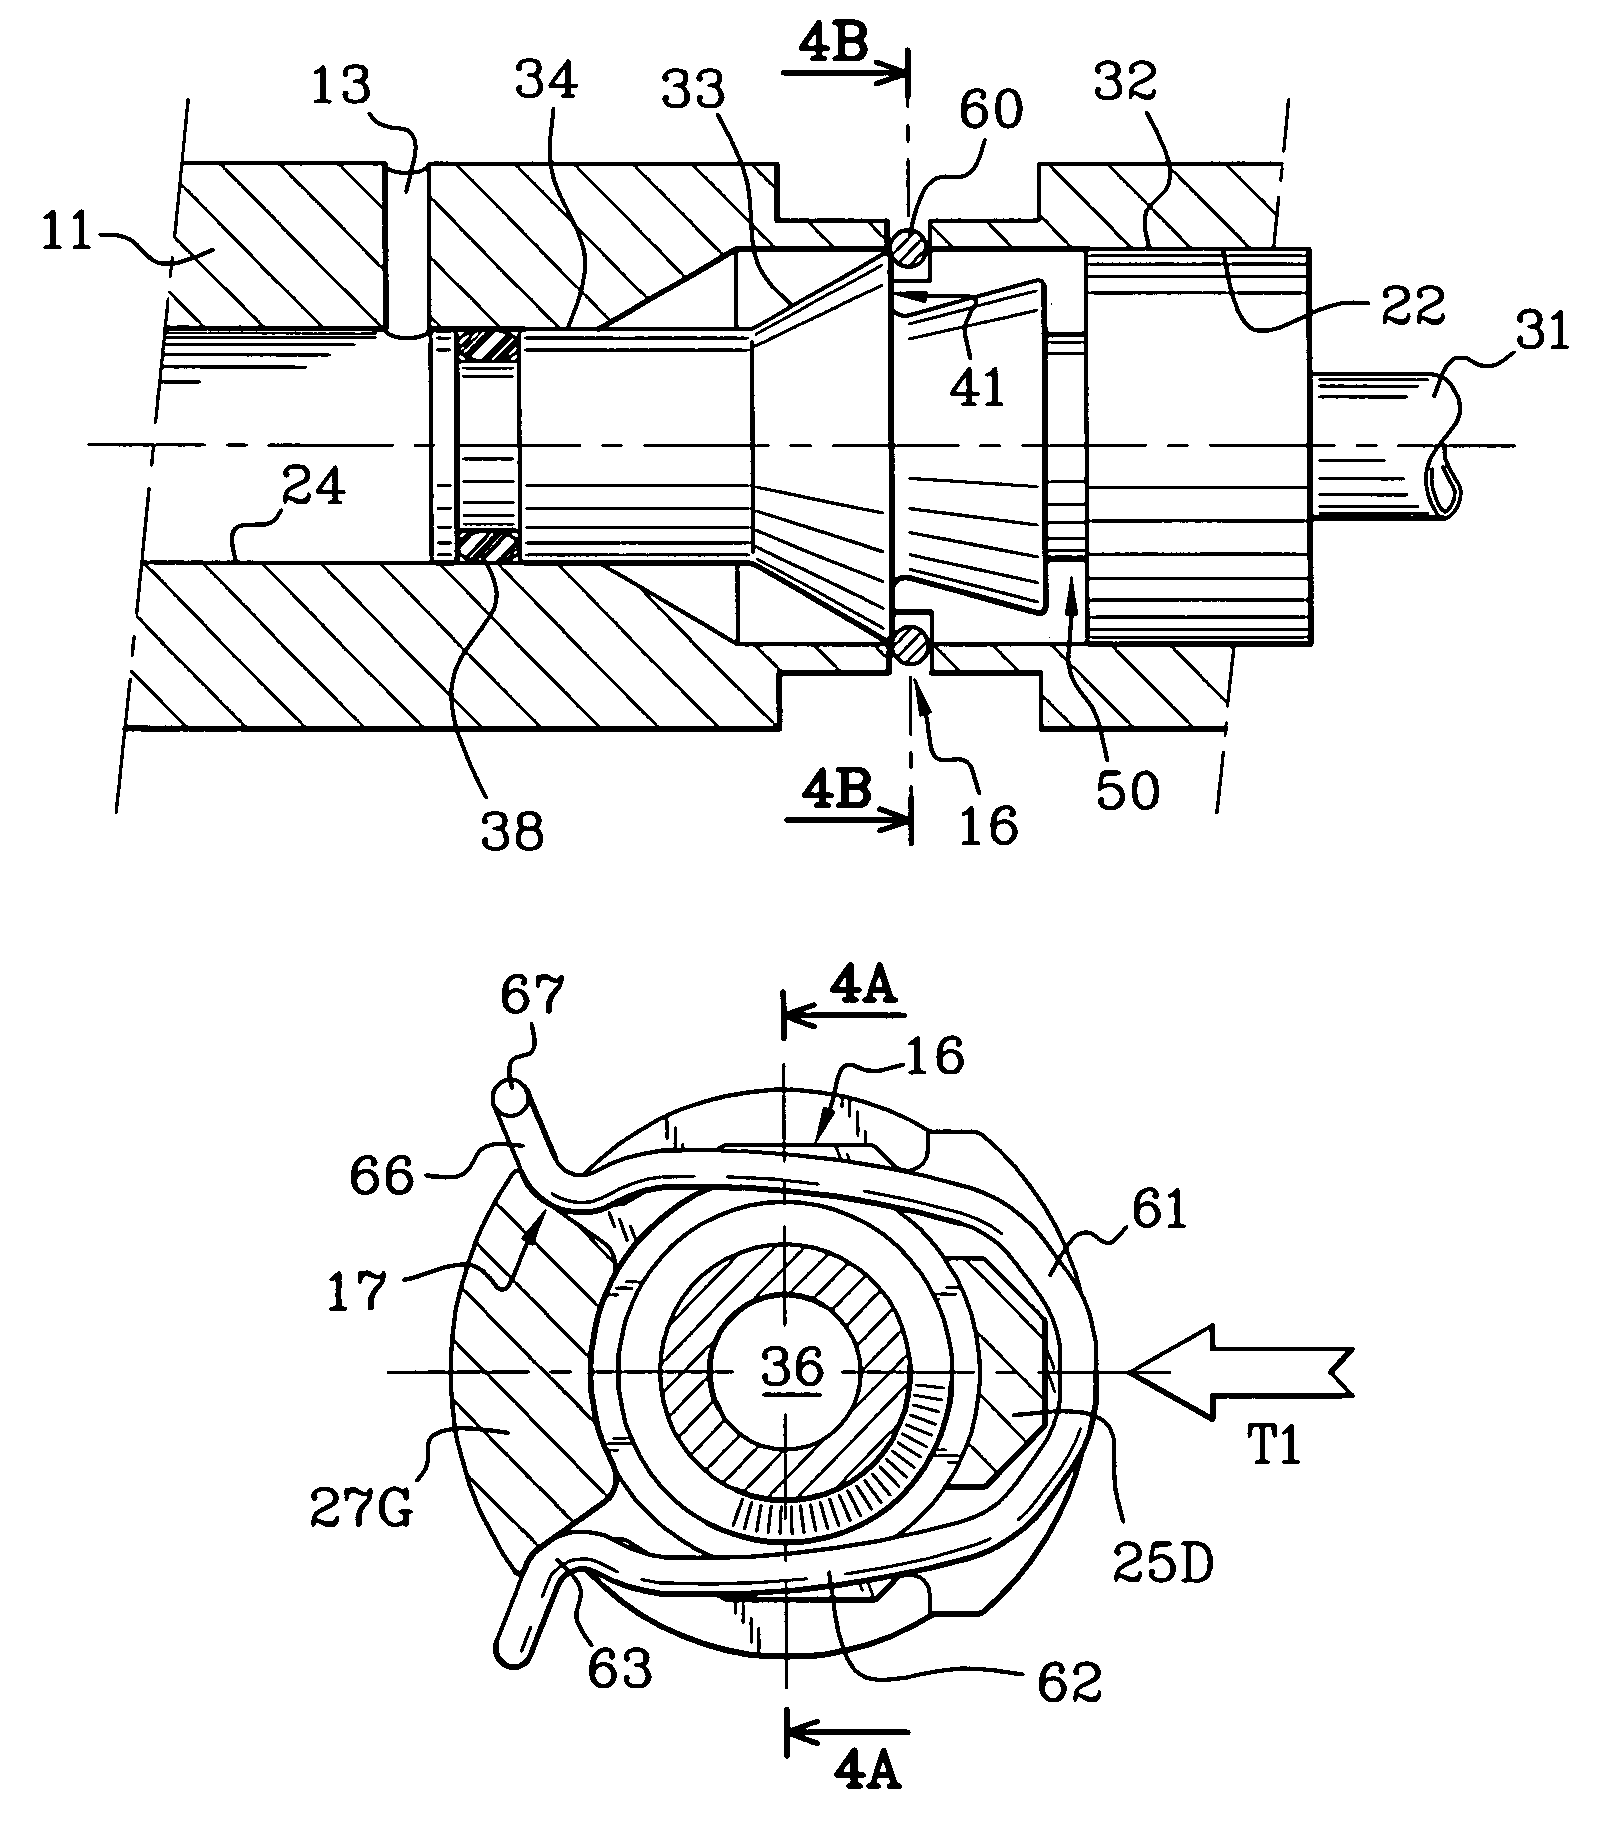 Supply connection device for a fluid pressure system